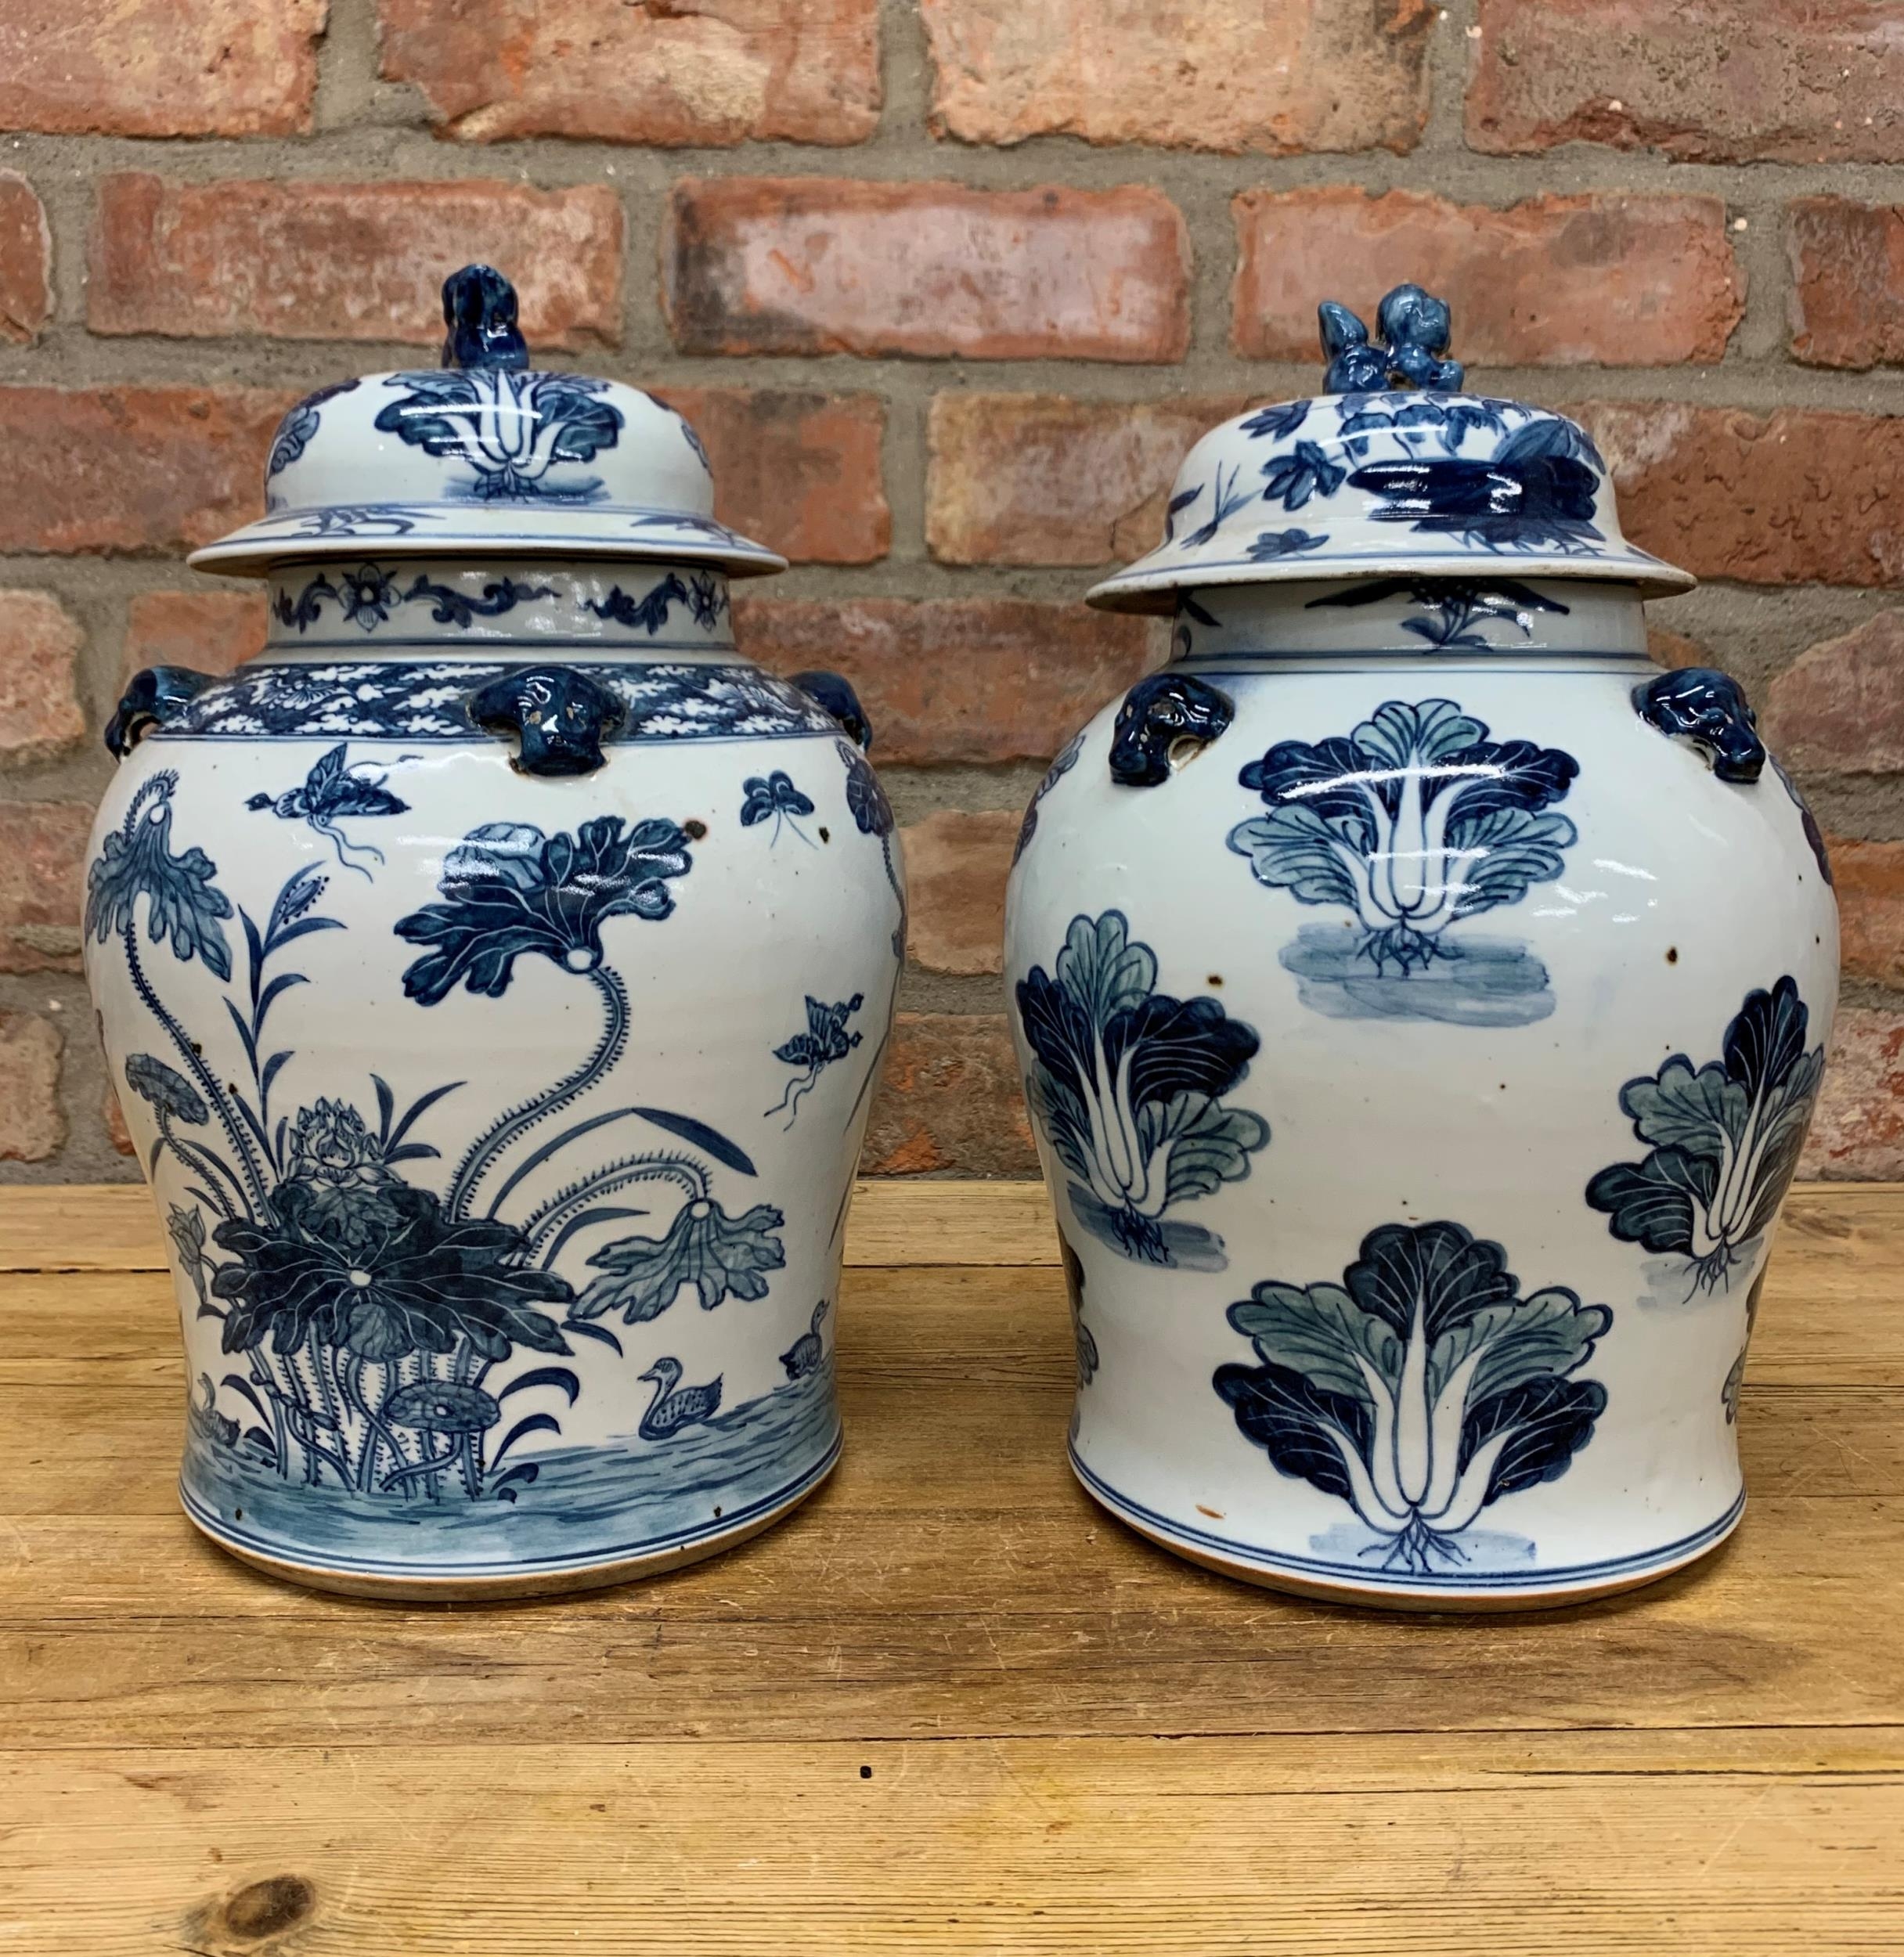 Matched pair of Chinese blue and white export porcelain lidded ginger jars, foo dog finial lid, H